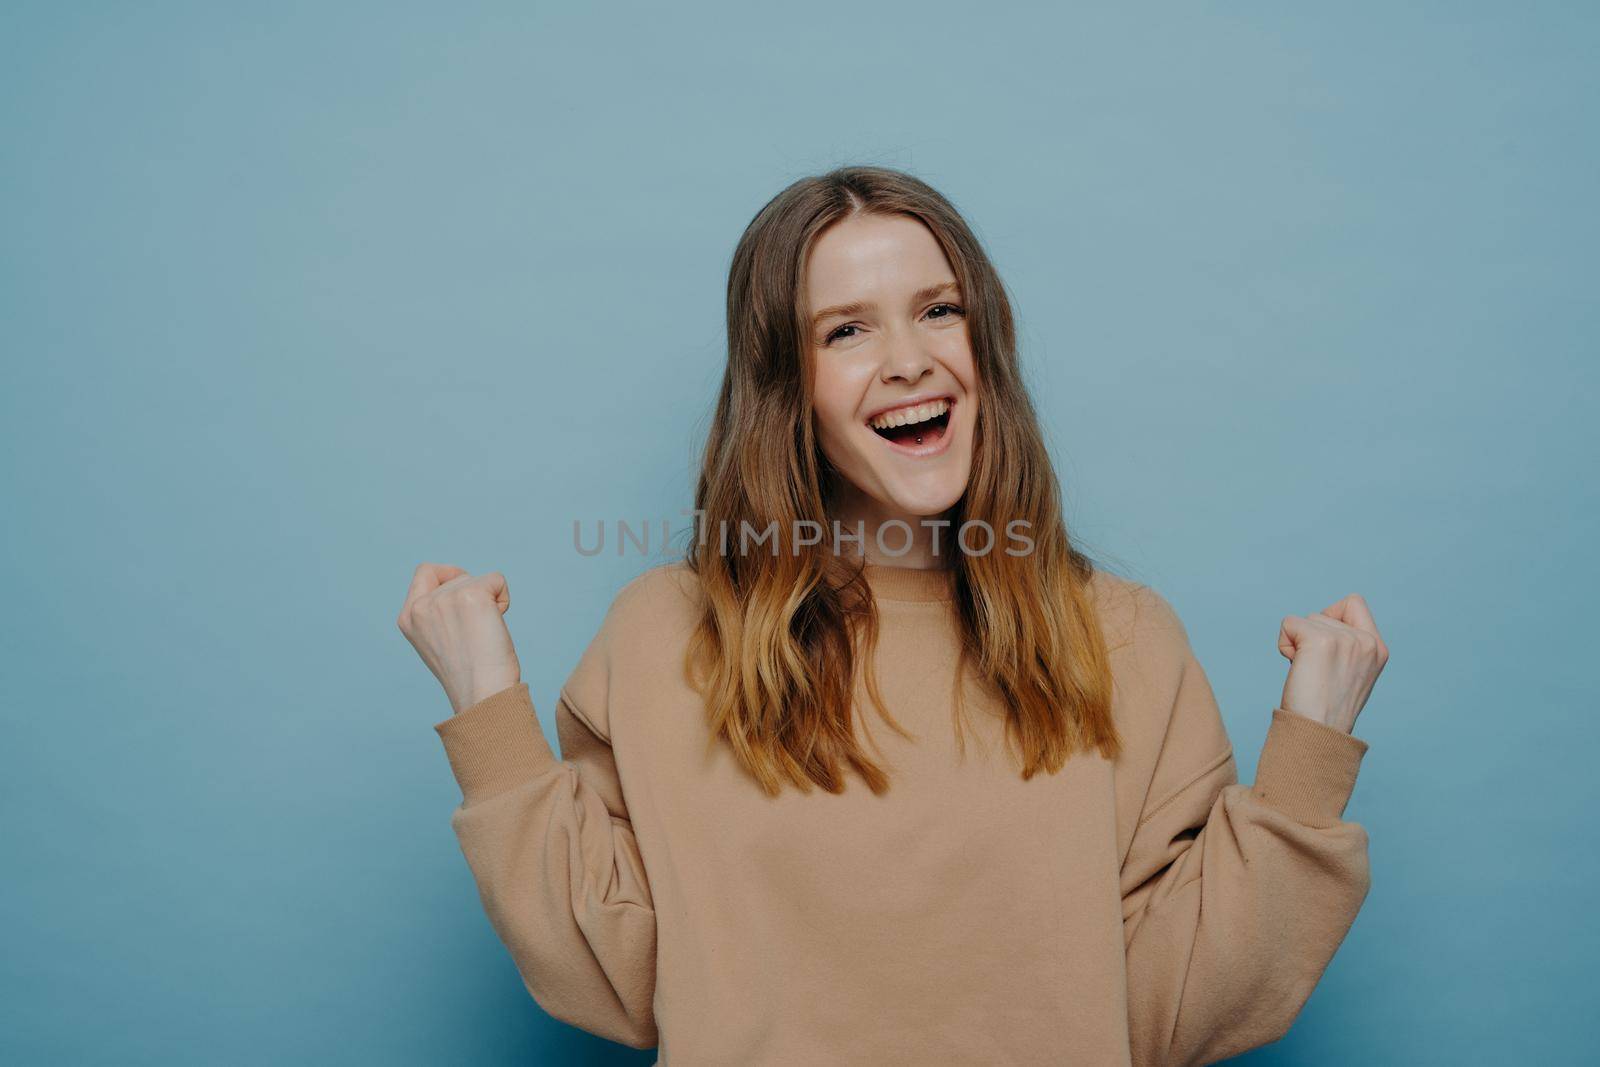 Teenage girl celebrating victory or success isolated on blue background by vkstock